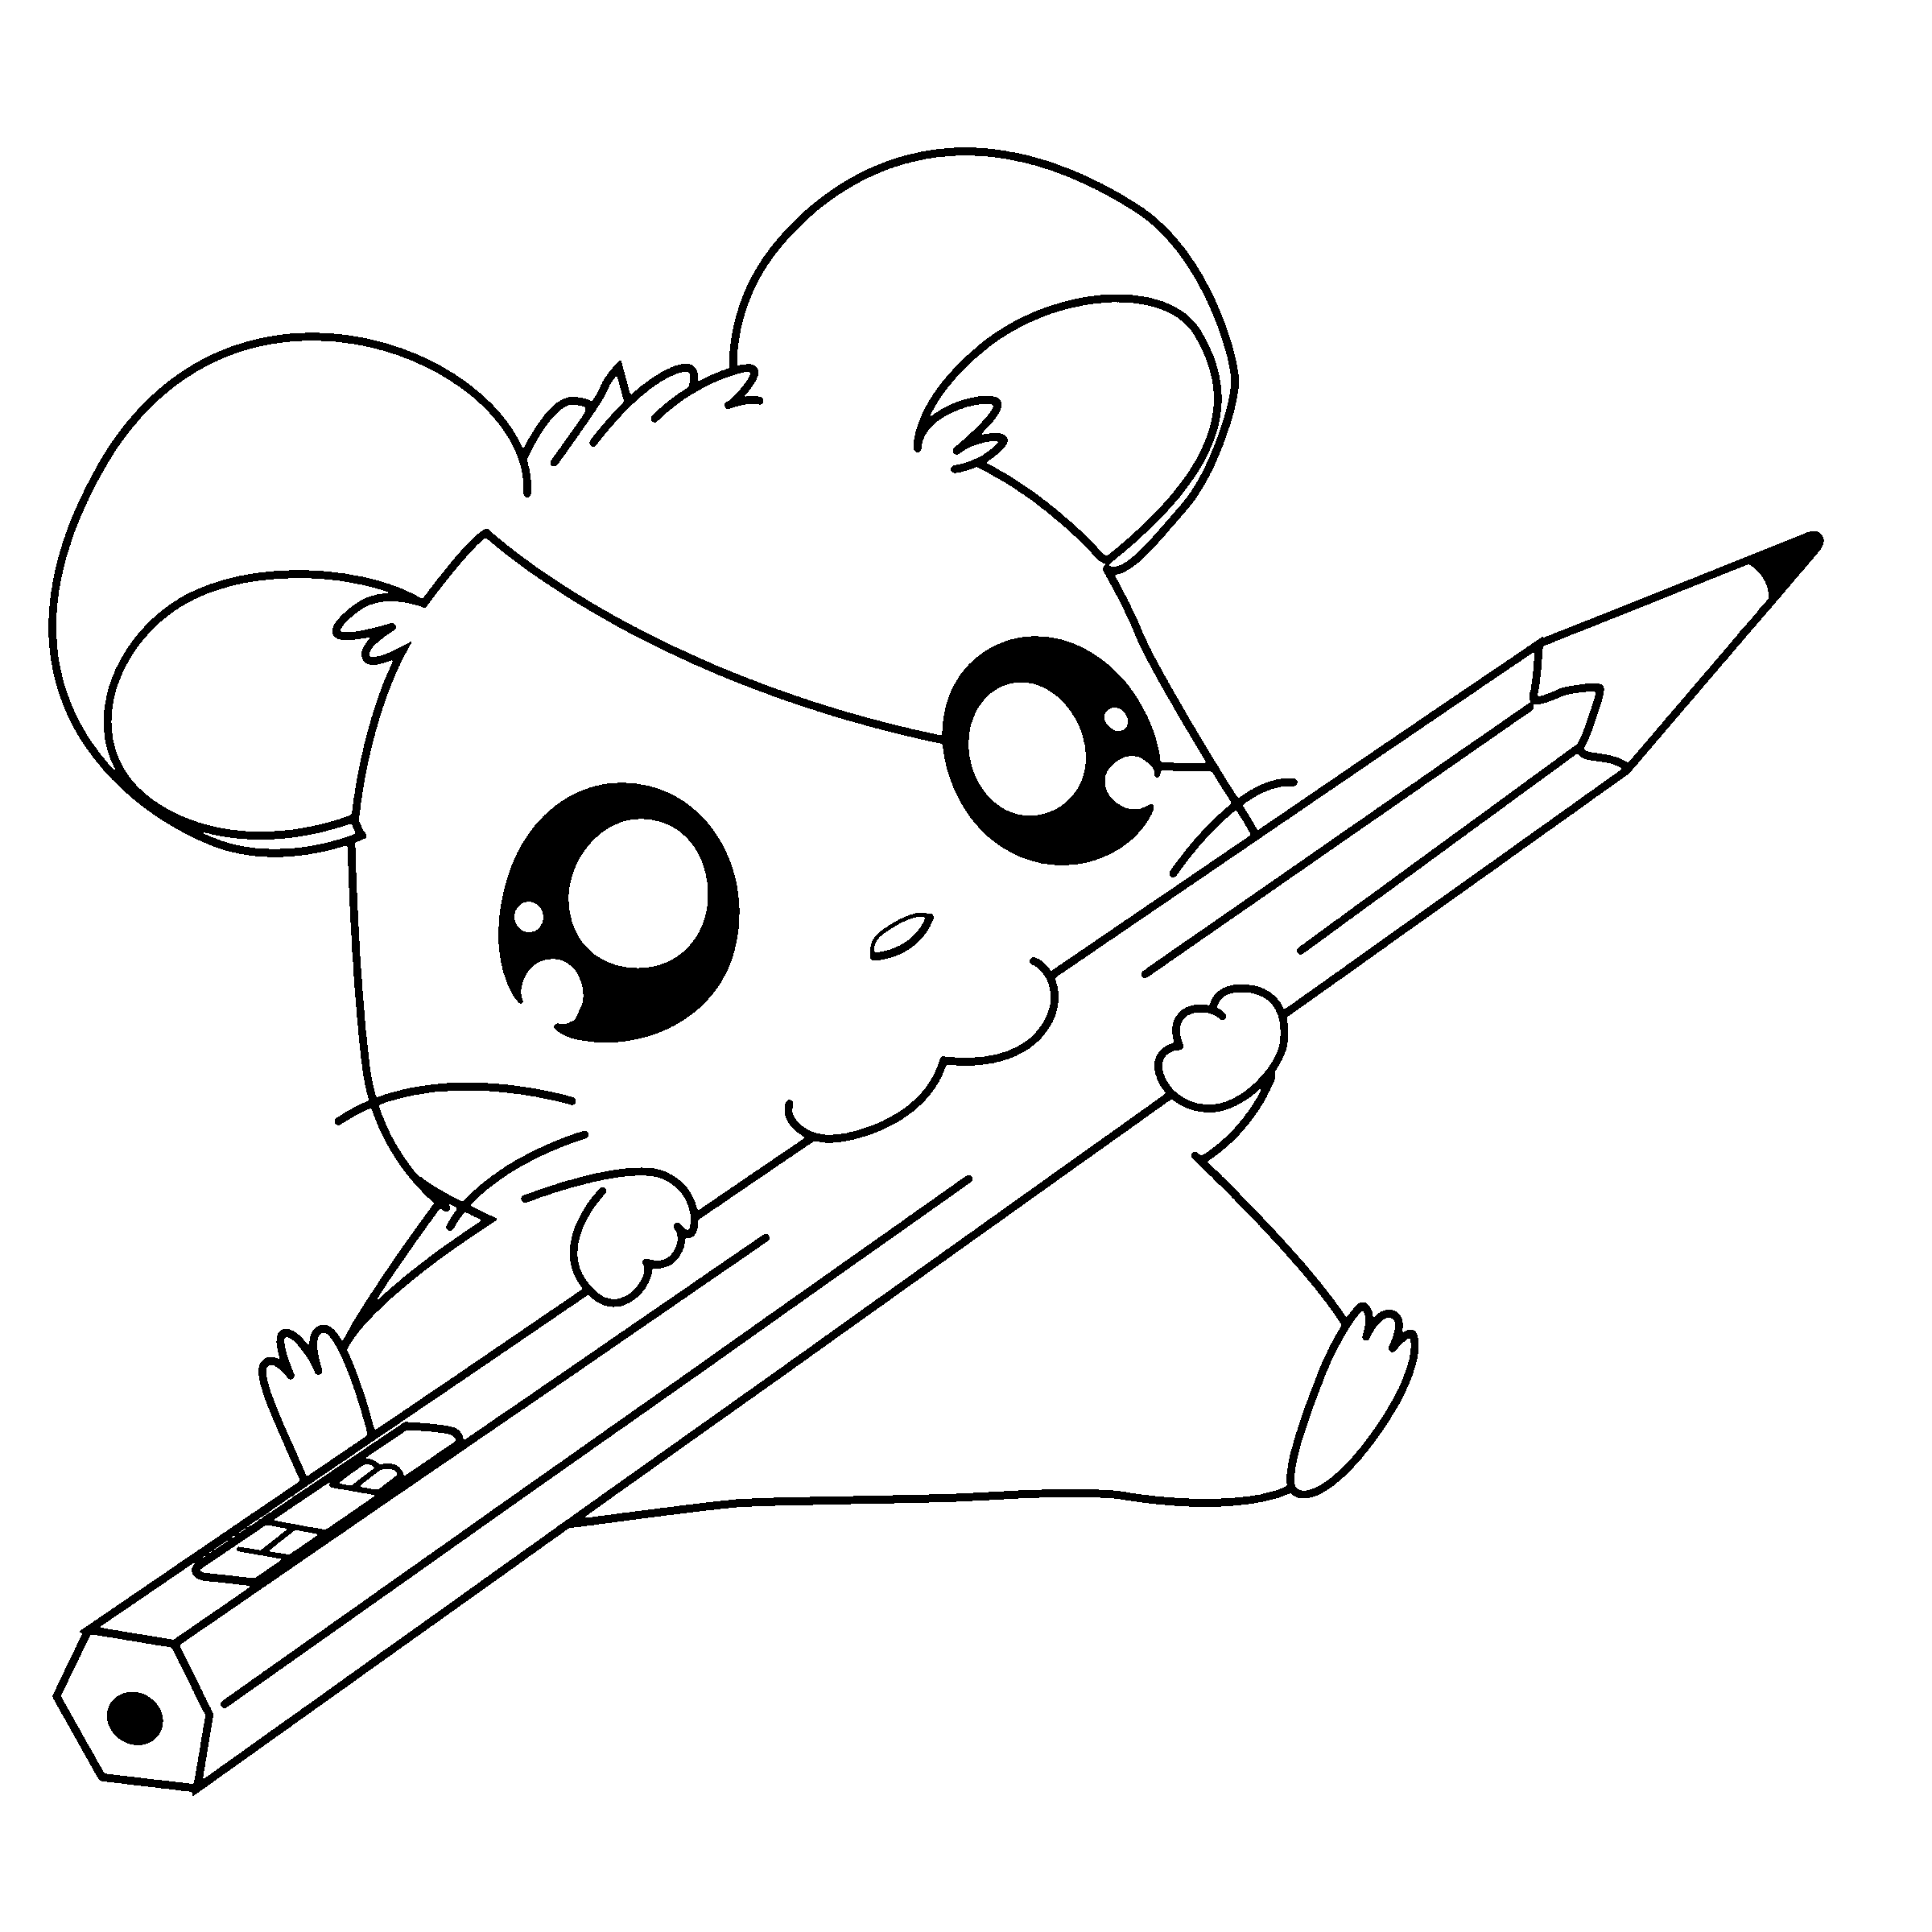 Coloring Pages For Cute Animals   Coloring Home